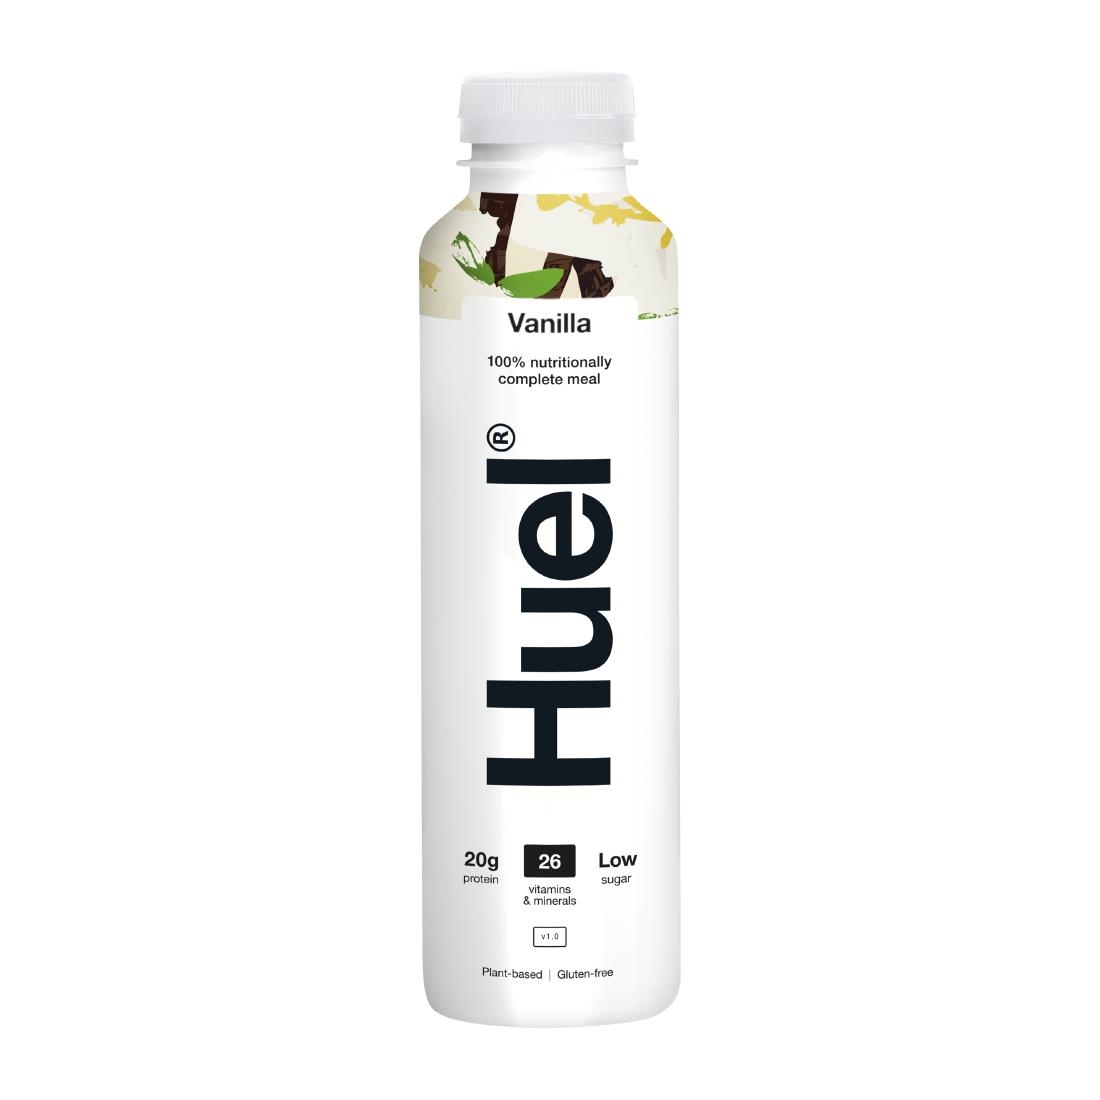 HUEL 100 Nutritionally Complete Meal Drink - Vanilla 500ml Pack of 8 (HS541)